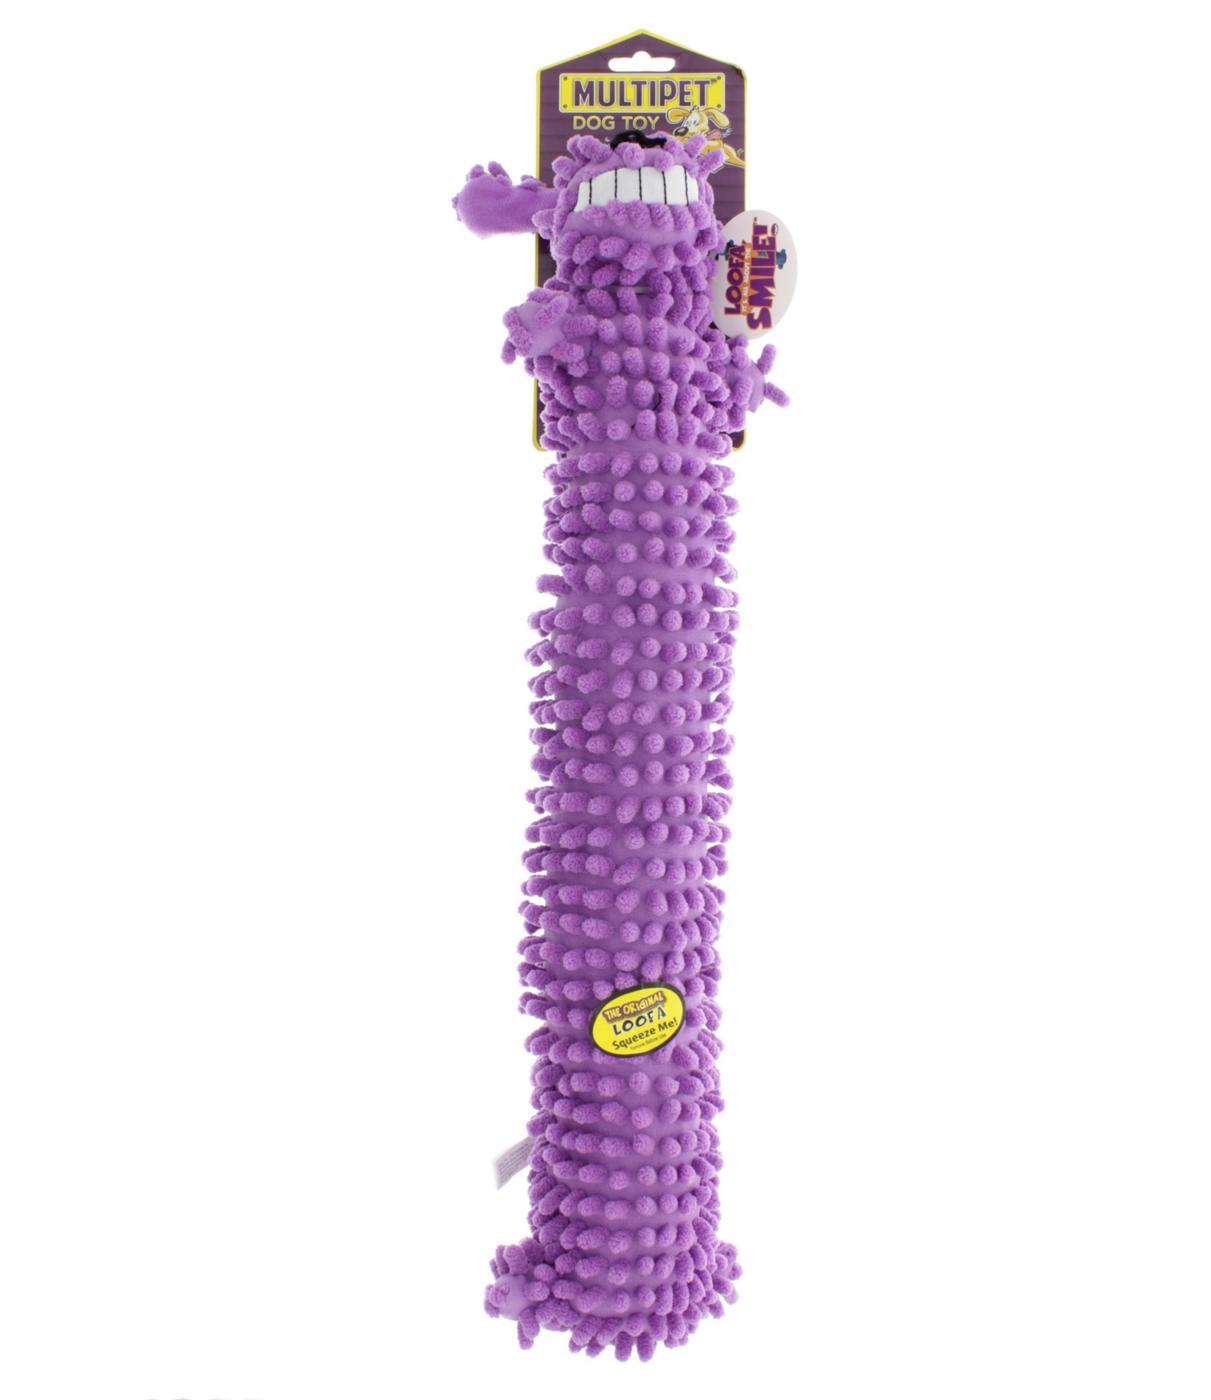 Multipet Purple 18" Floppy Moppy Loofa Dog Toy, Assorted Colors; image 3 of 3